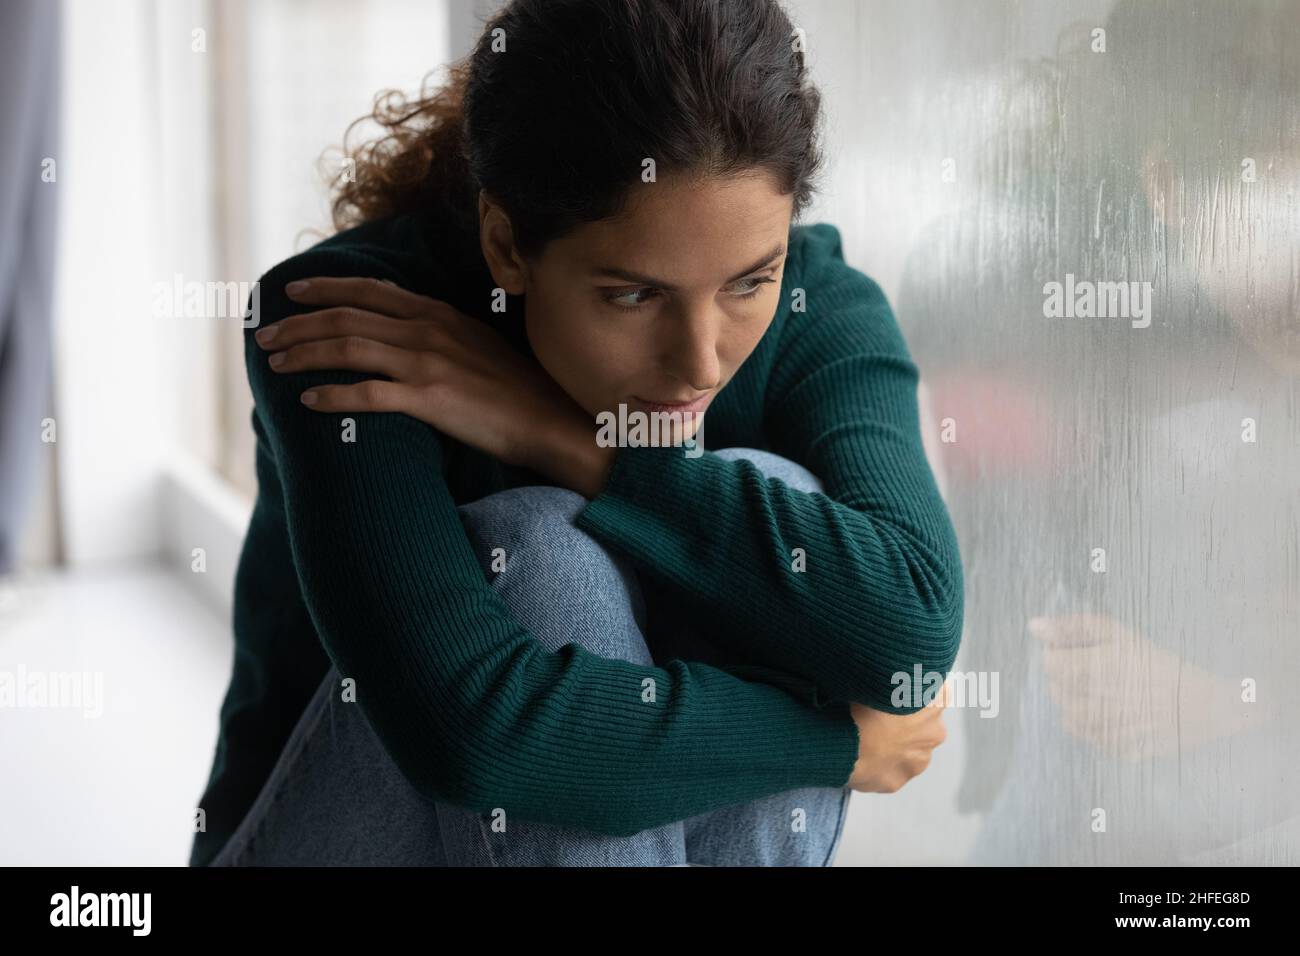 Depressed young woman suffering from psychological problems. Stock Photo